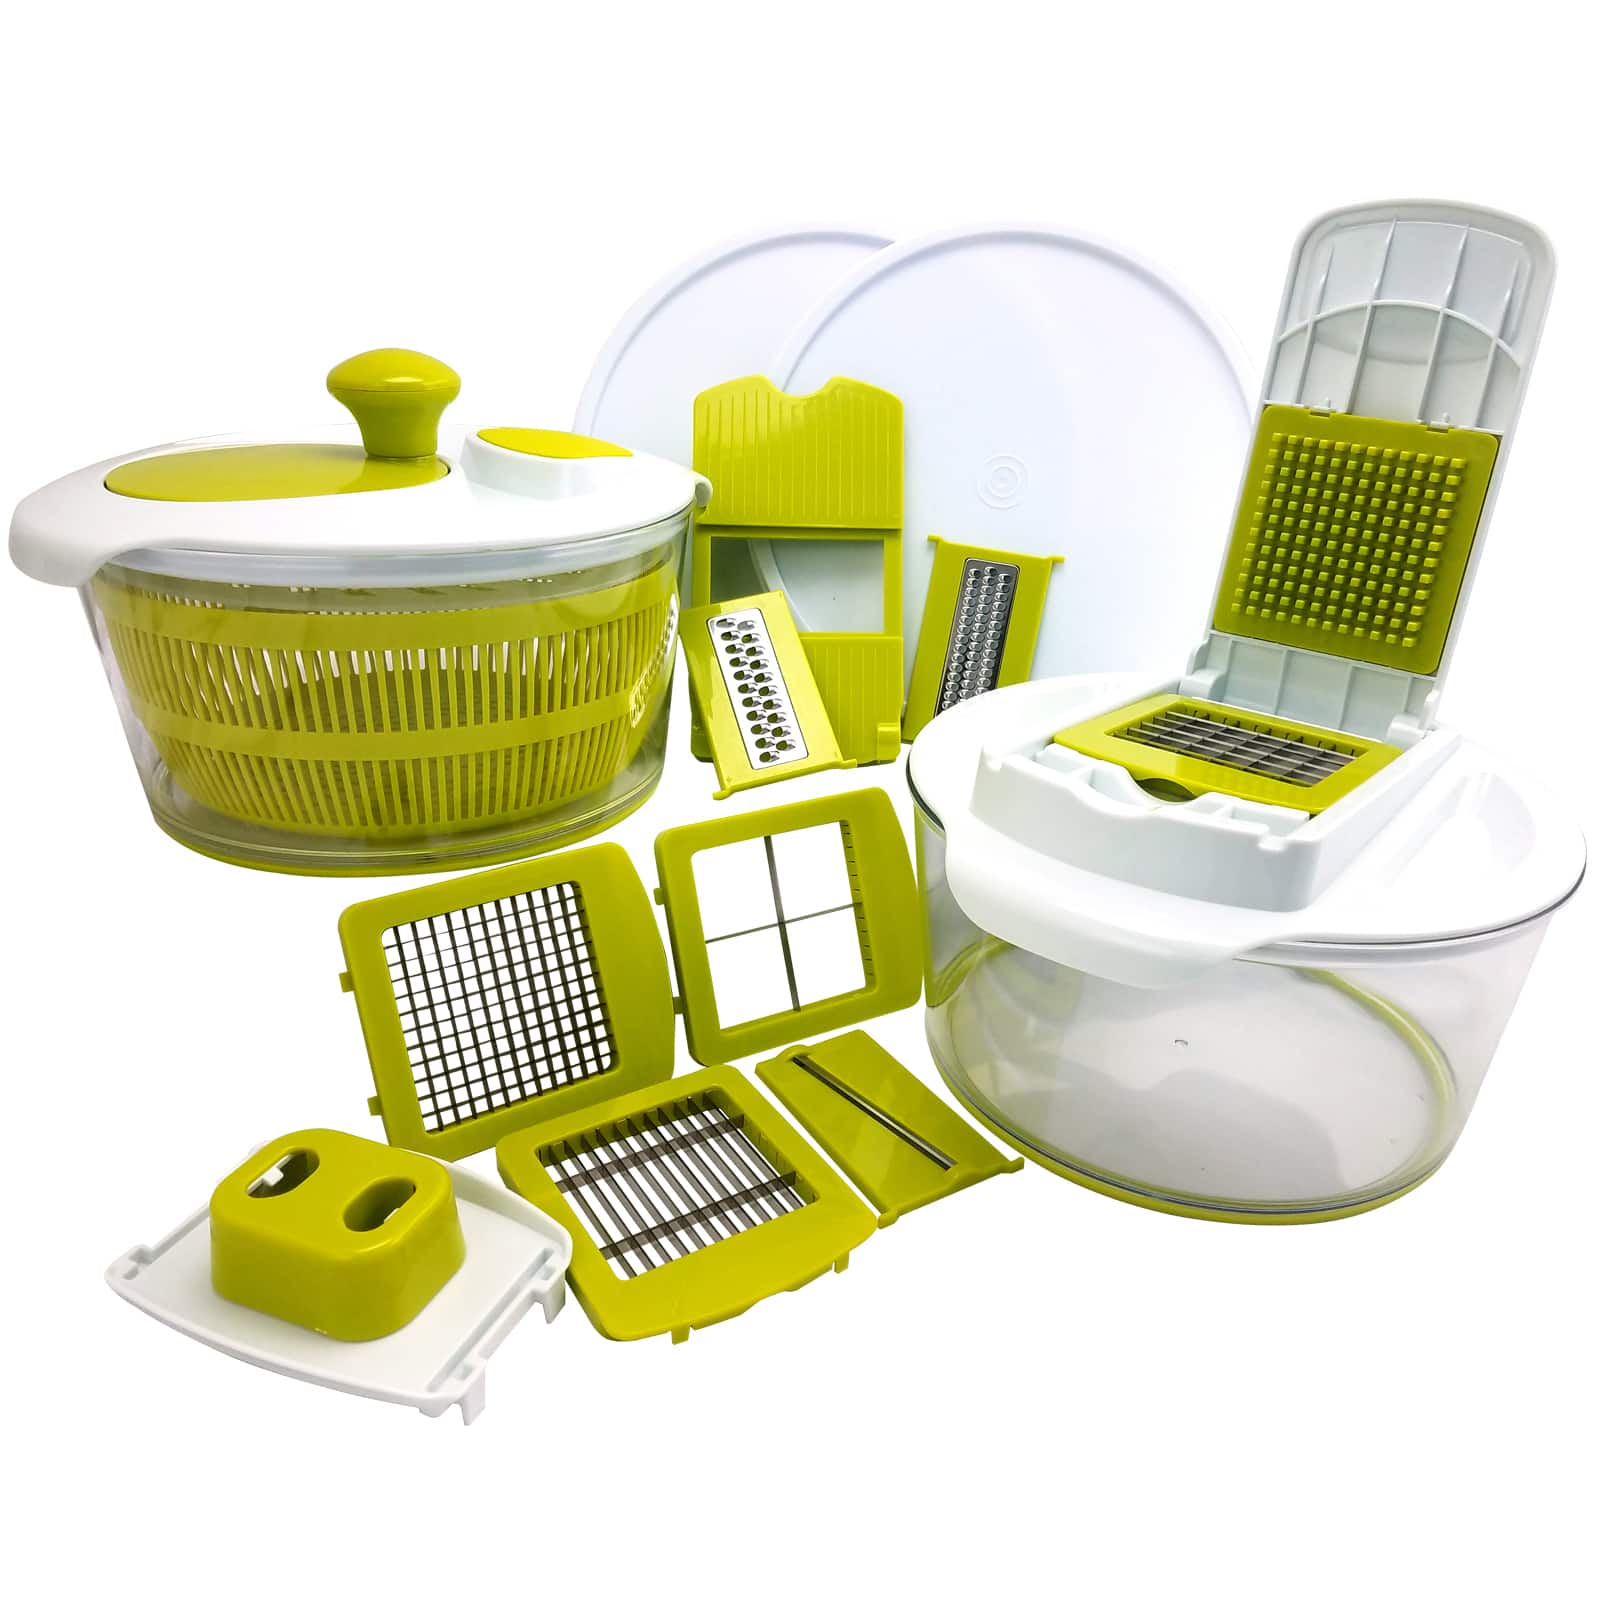 MegaChef 10-in-1 Multi-Use Salad Spinning Slicer, Dicer &#x26; Chopper with Interchangeable Blades &#x26; Storage Lids